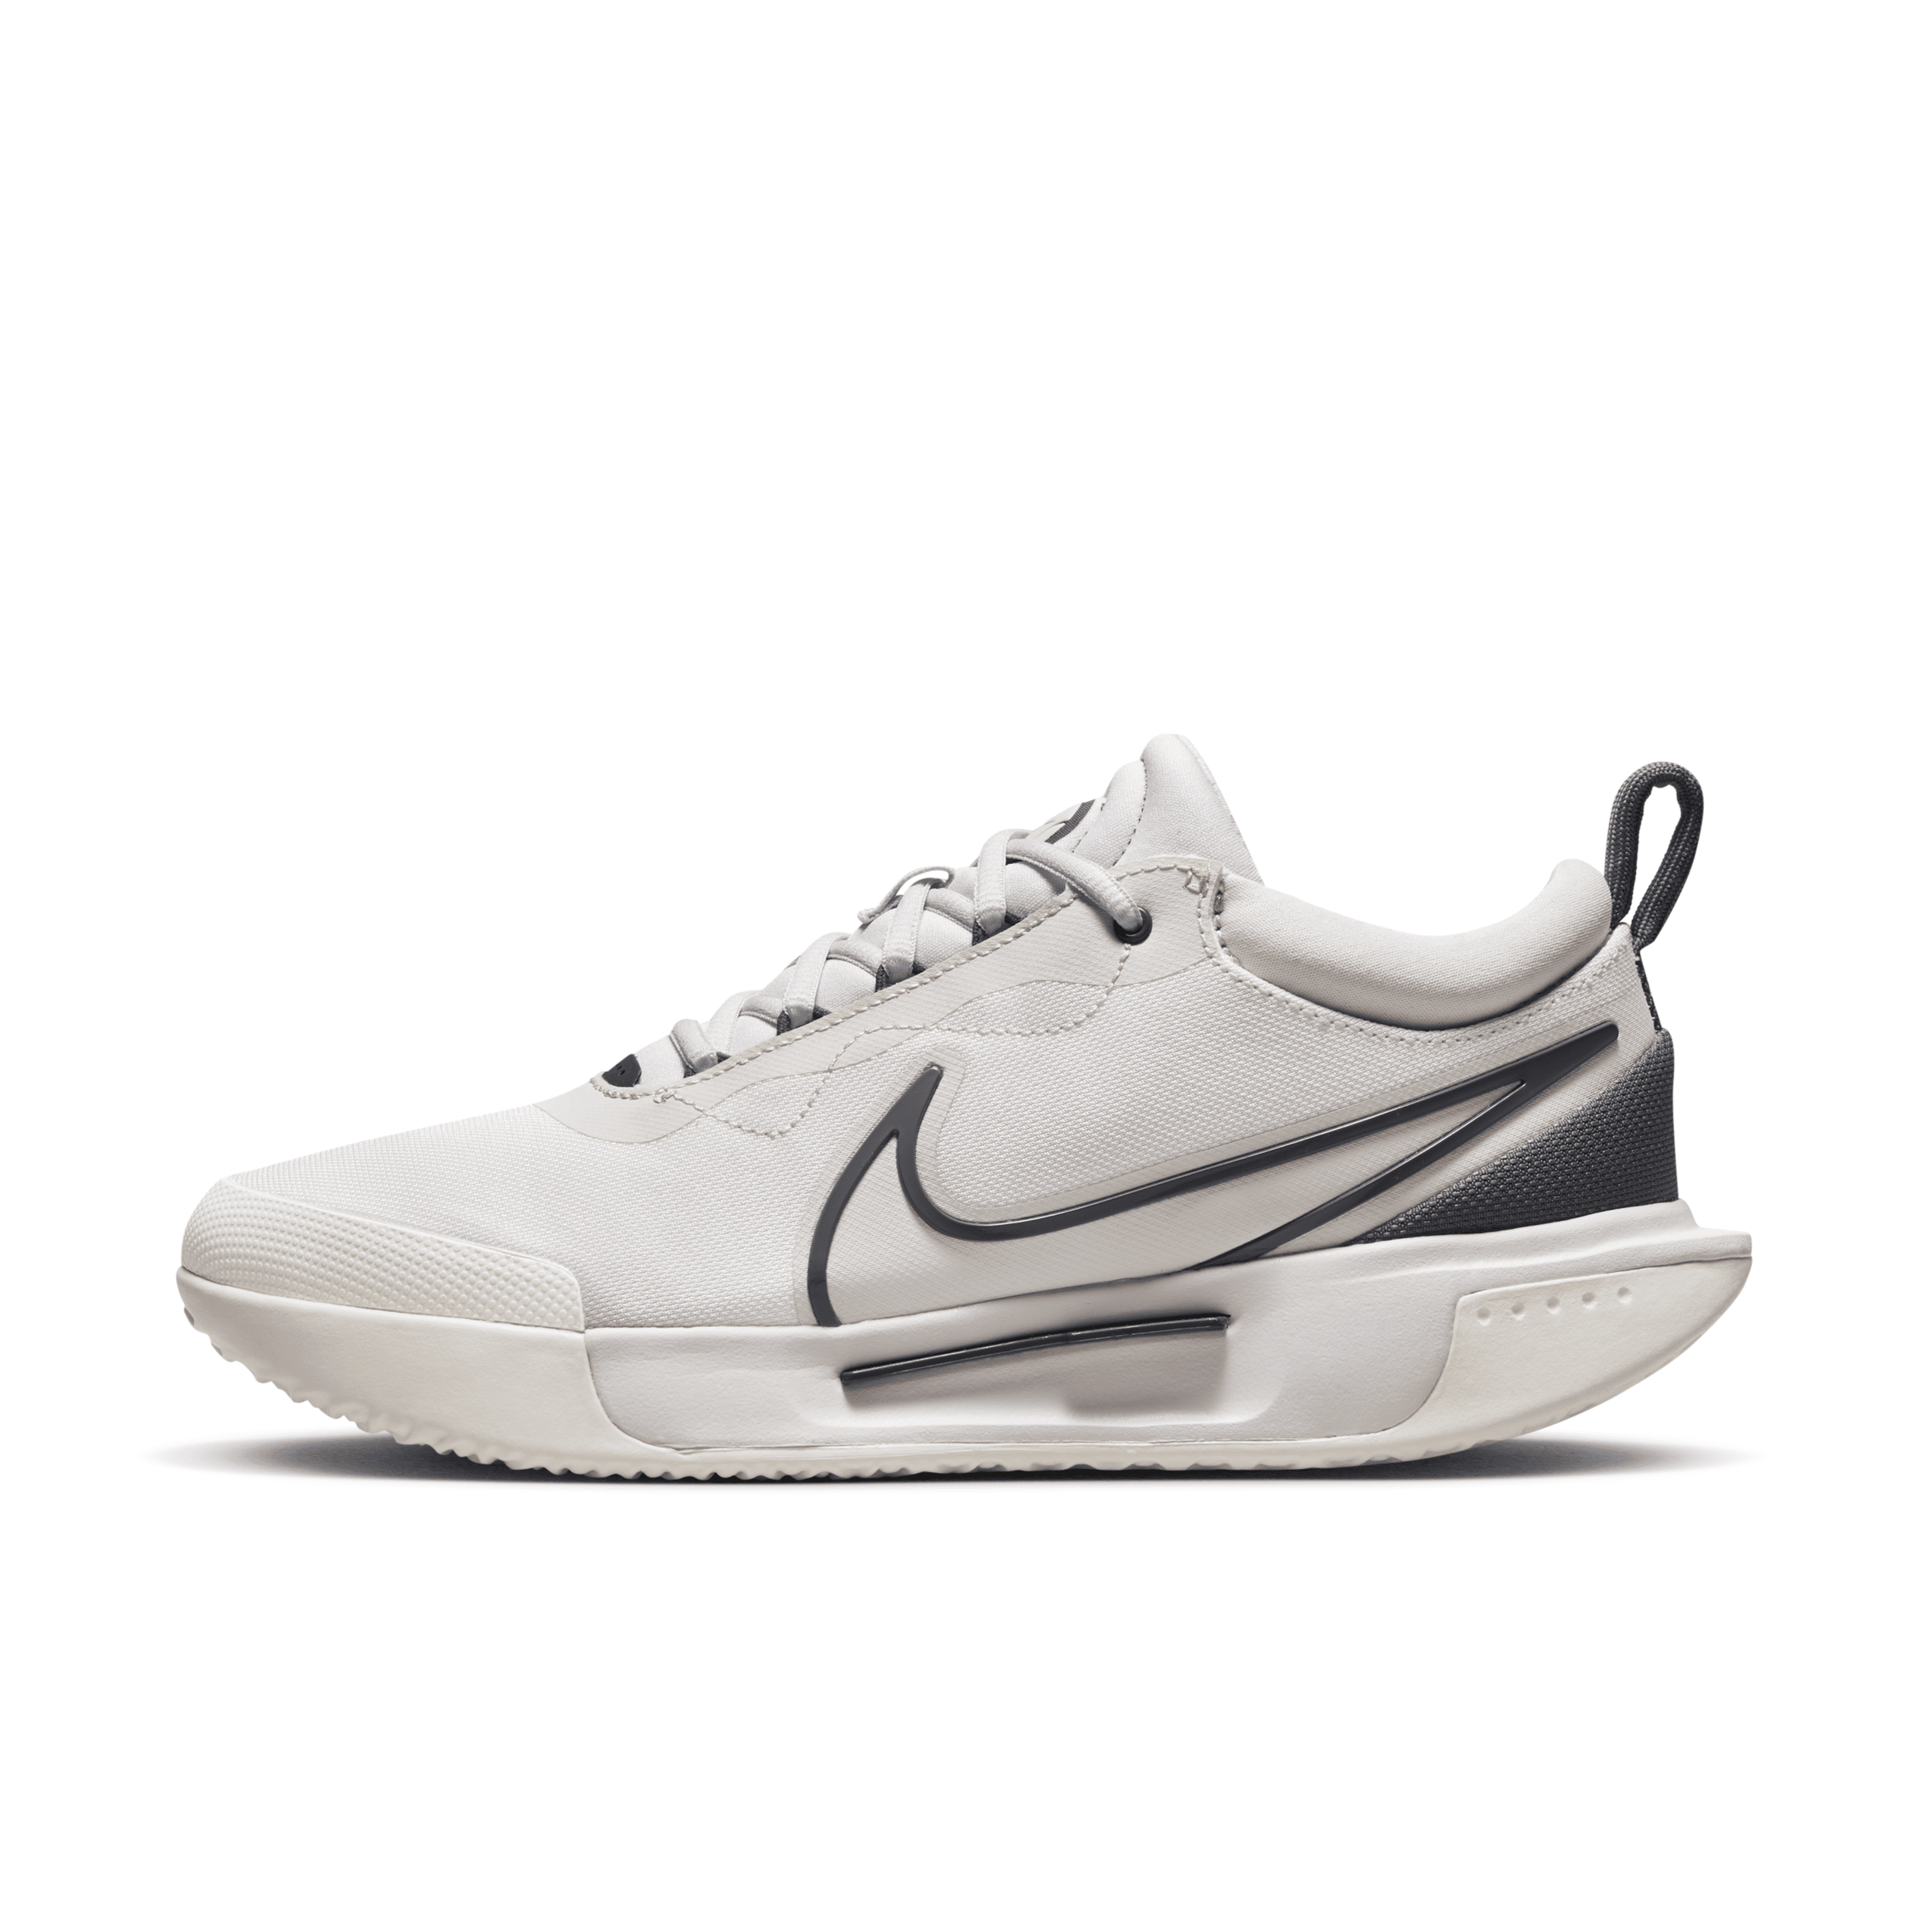 Nike Women's Court Air Zoom Pro Hard Court Tennis Shoes In Grey